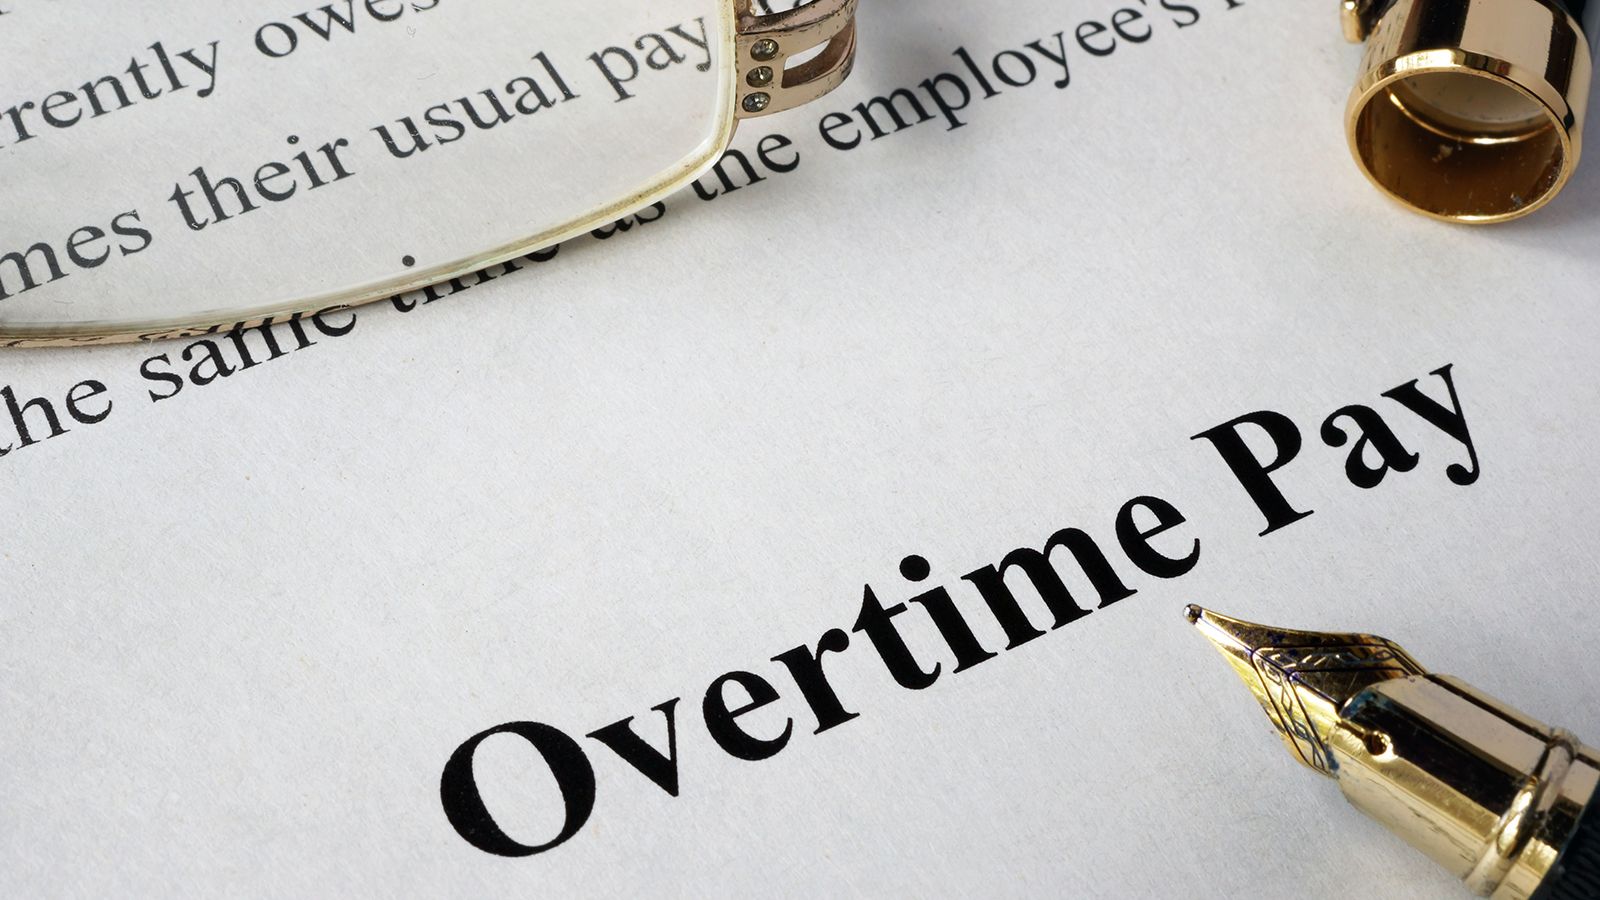 Exemptions from Overtime/Minimum Wage